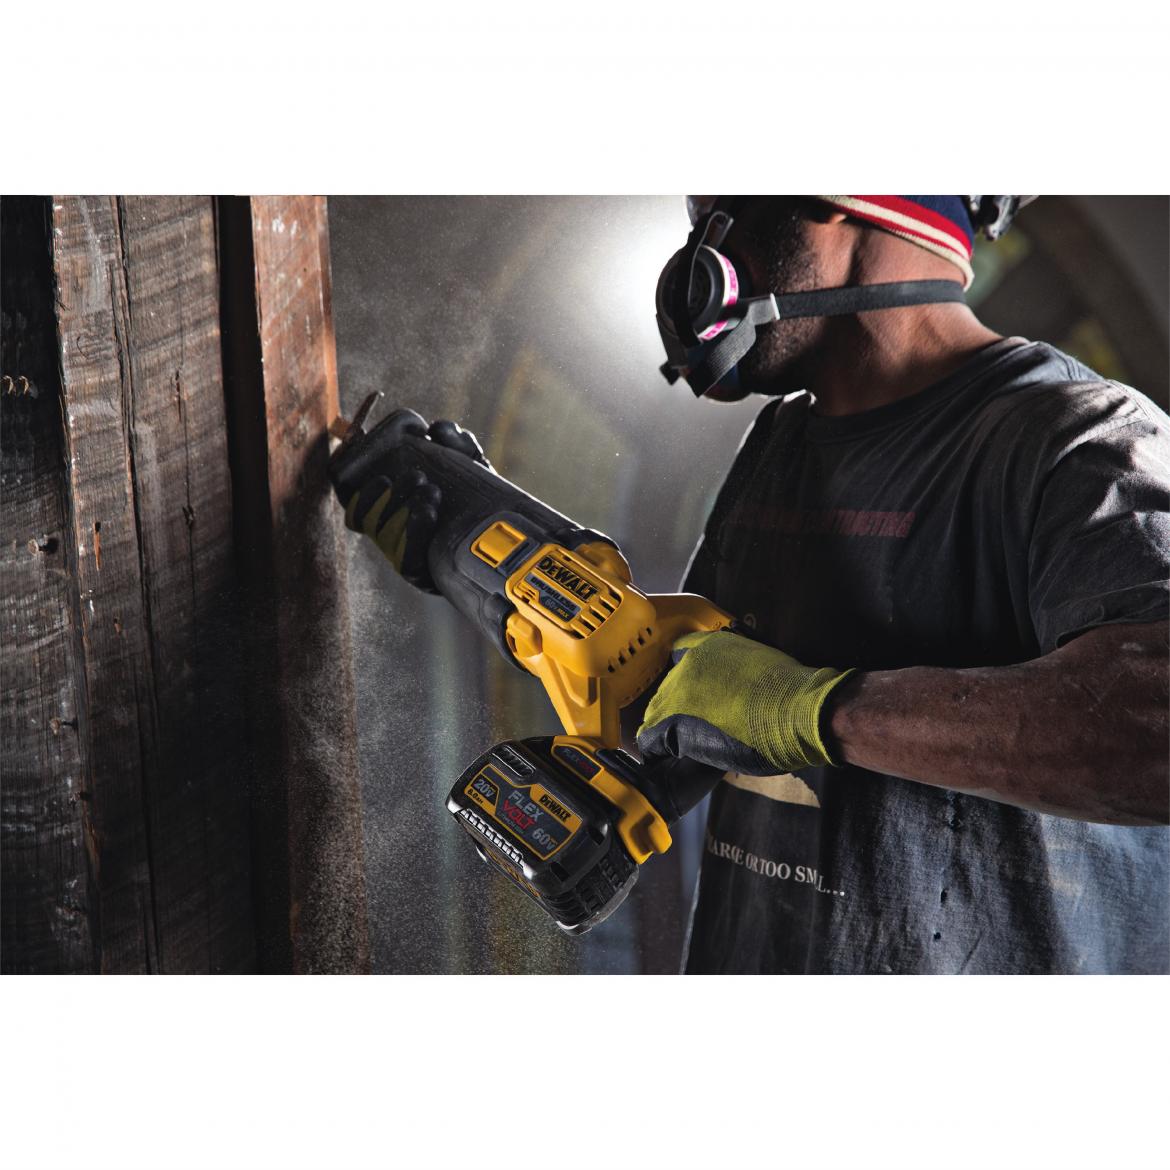 Flexvolt is the industry’s first cordless tool system in which the batteries automatically change voltage when the user switches between tools of varying voltages (20V Max, 60V Max, and 120V Max). According to the company, the system allows jobsites to fully transition from corded to cordless tools.